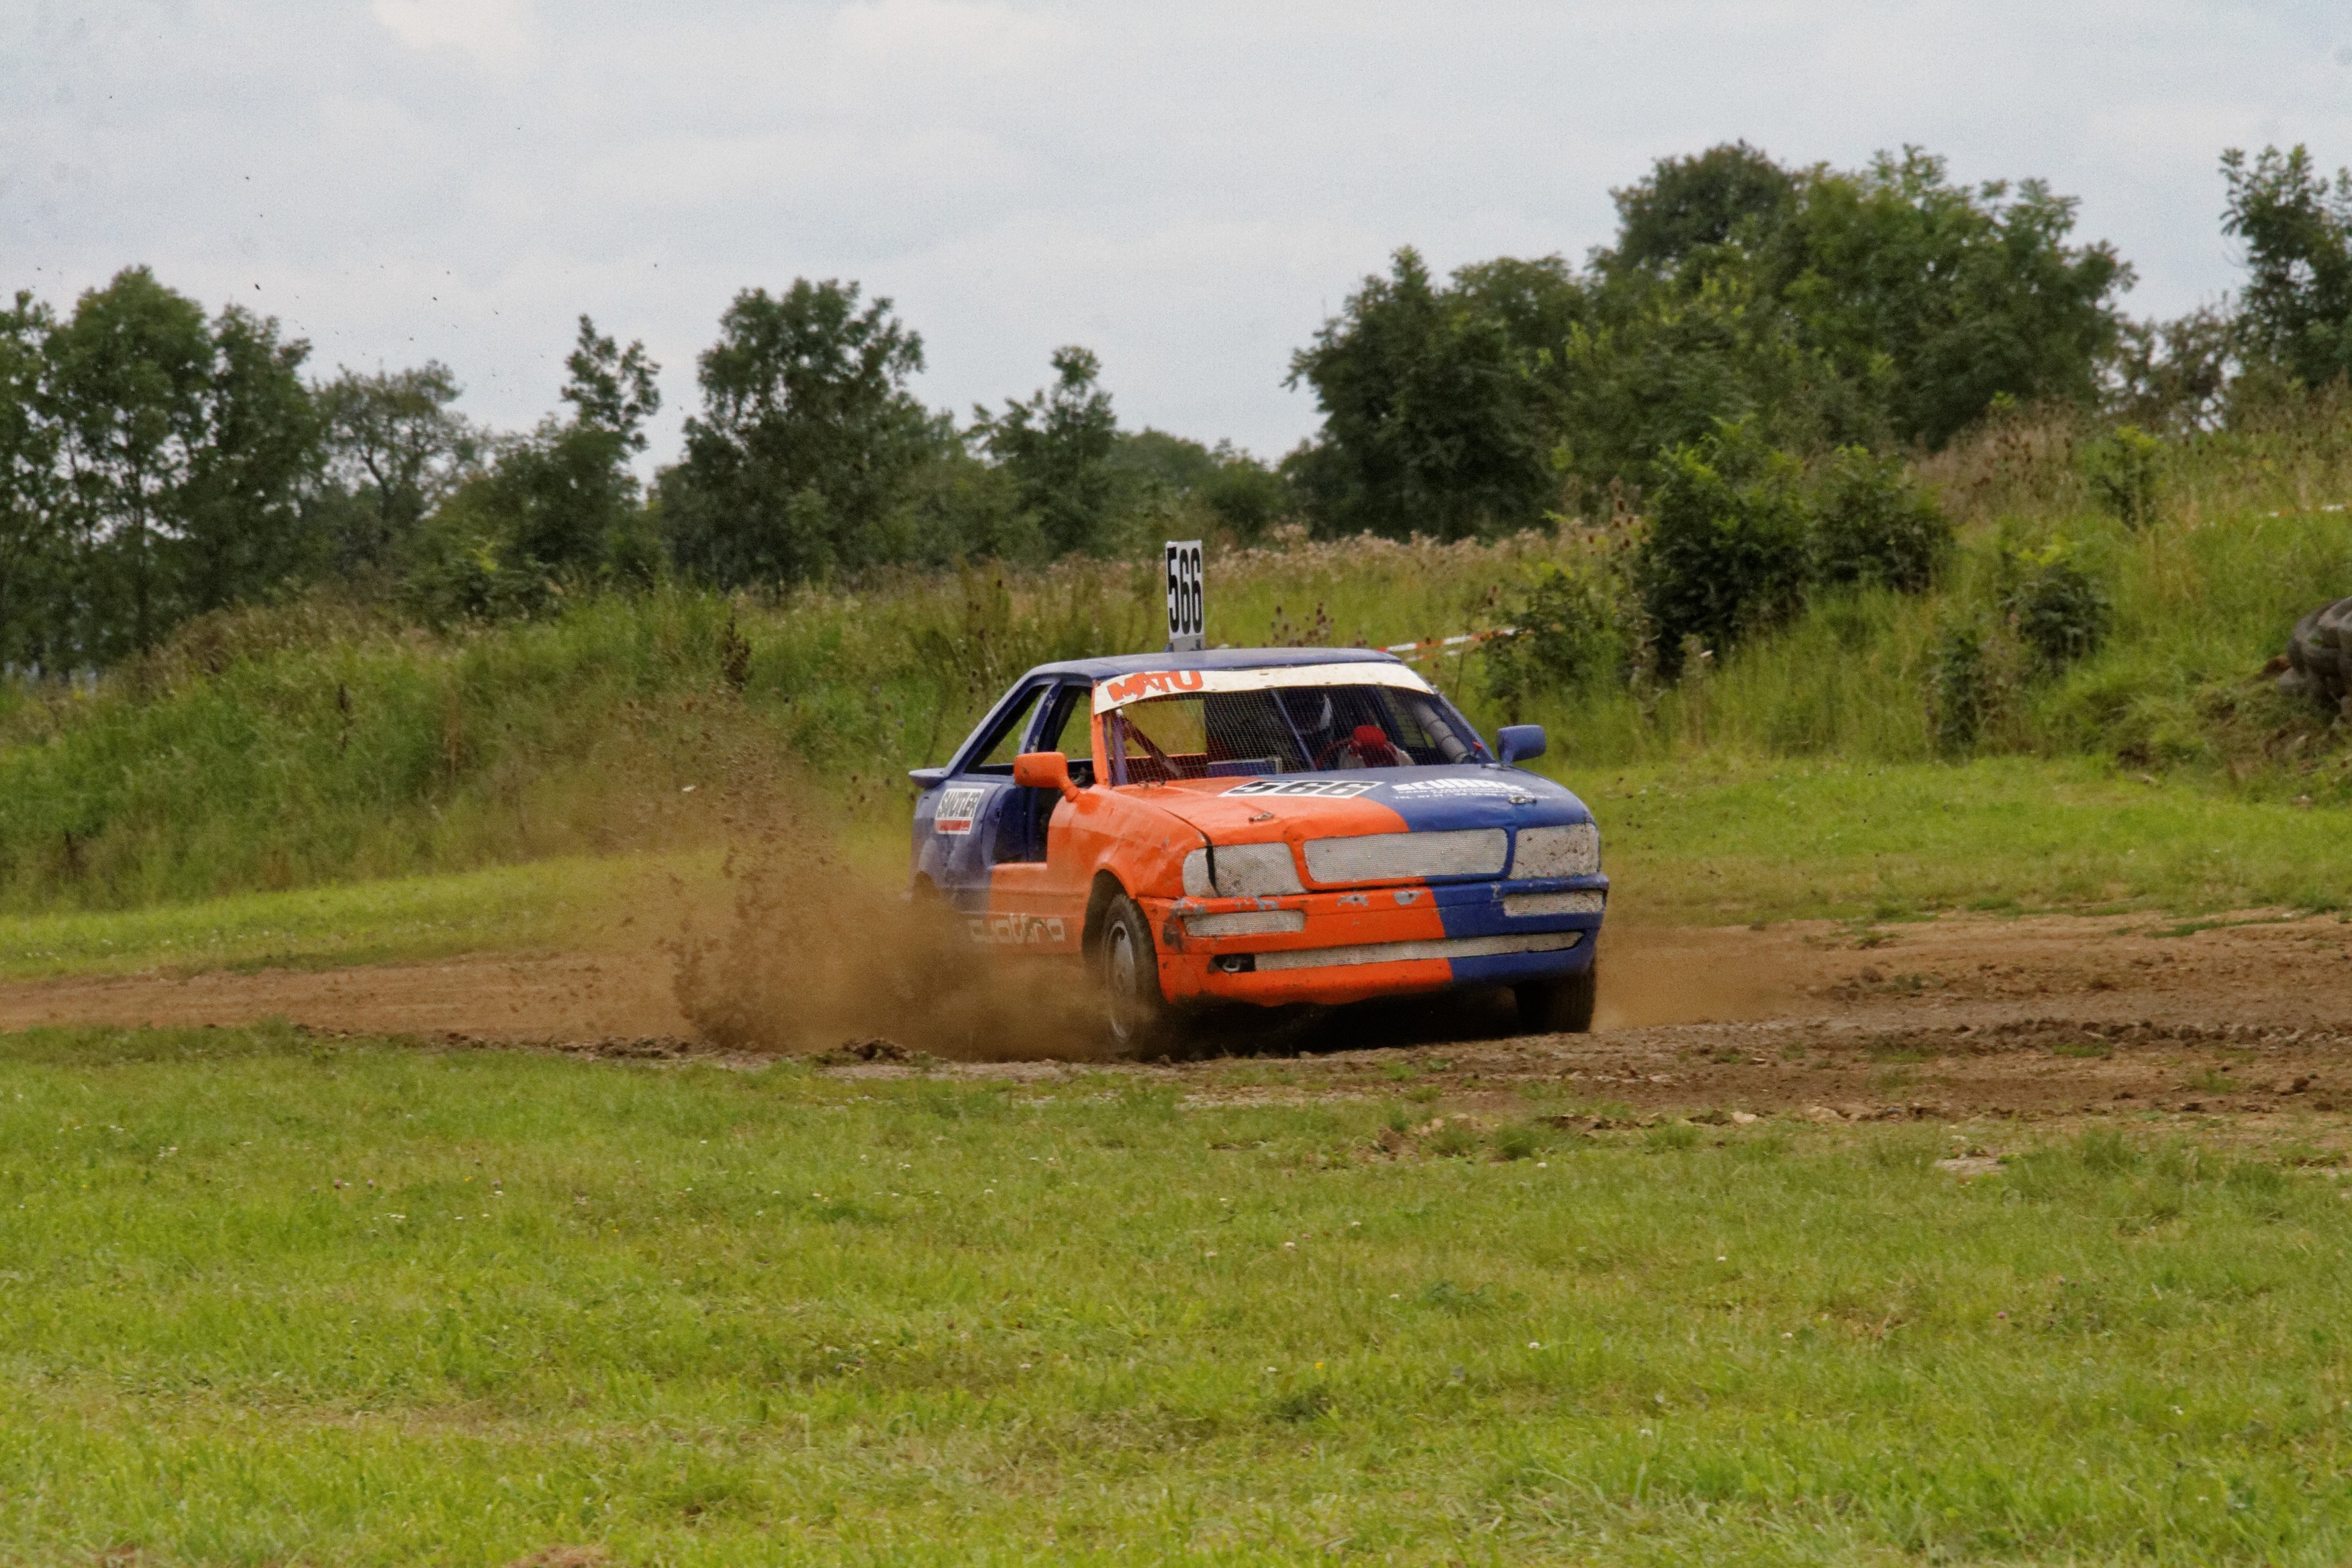 blue and orange racing car on dirt road during daytime